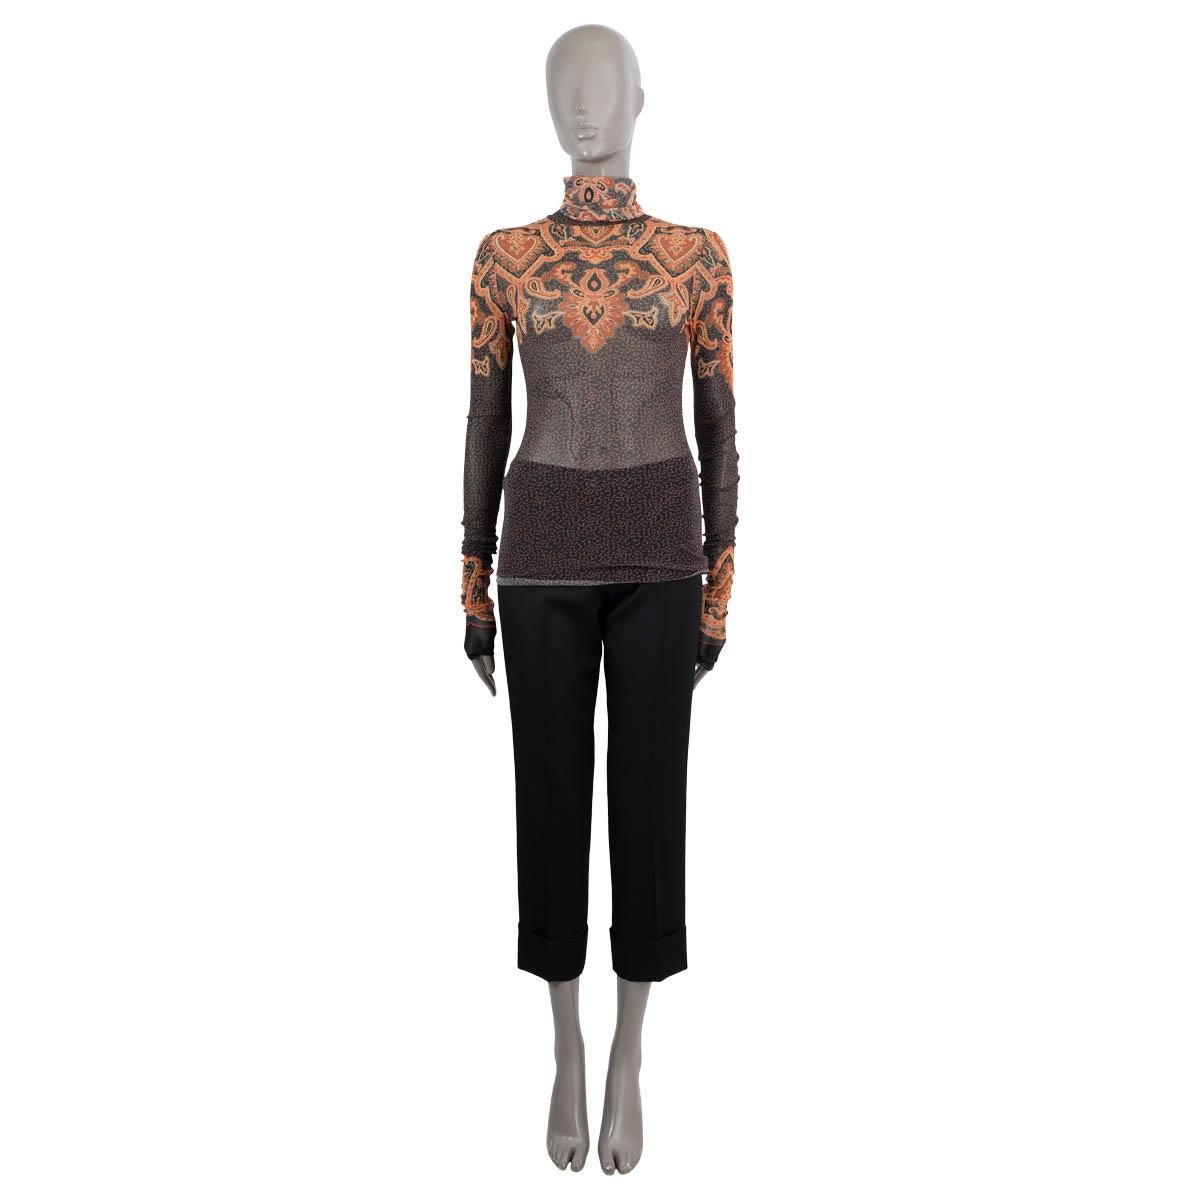 100% authentic Etro paisley stretch tulle turtleneck sweater in rust, black, orange and beige polyamide (100% - please note the content tag is missing). Has been worn and is in excellent condition.

2019 Fall/Winter

Measurements
Tag